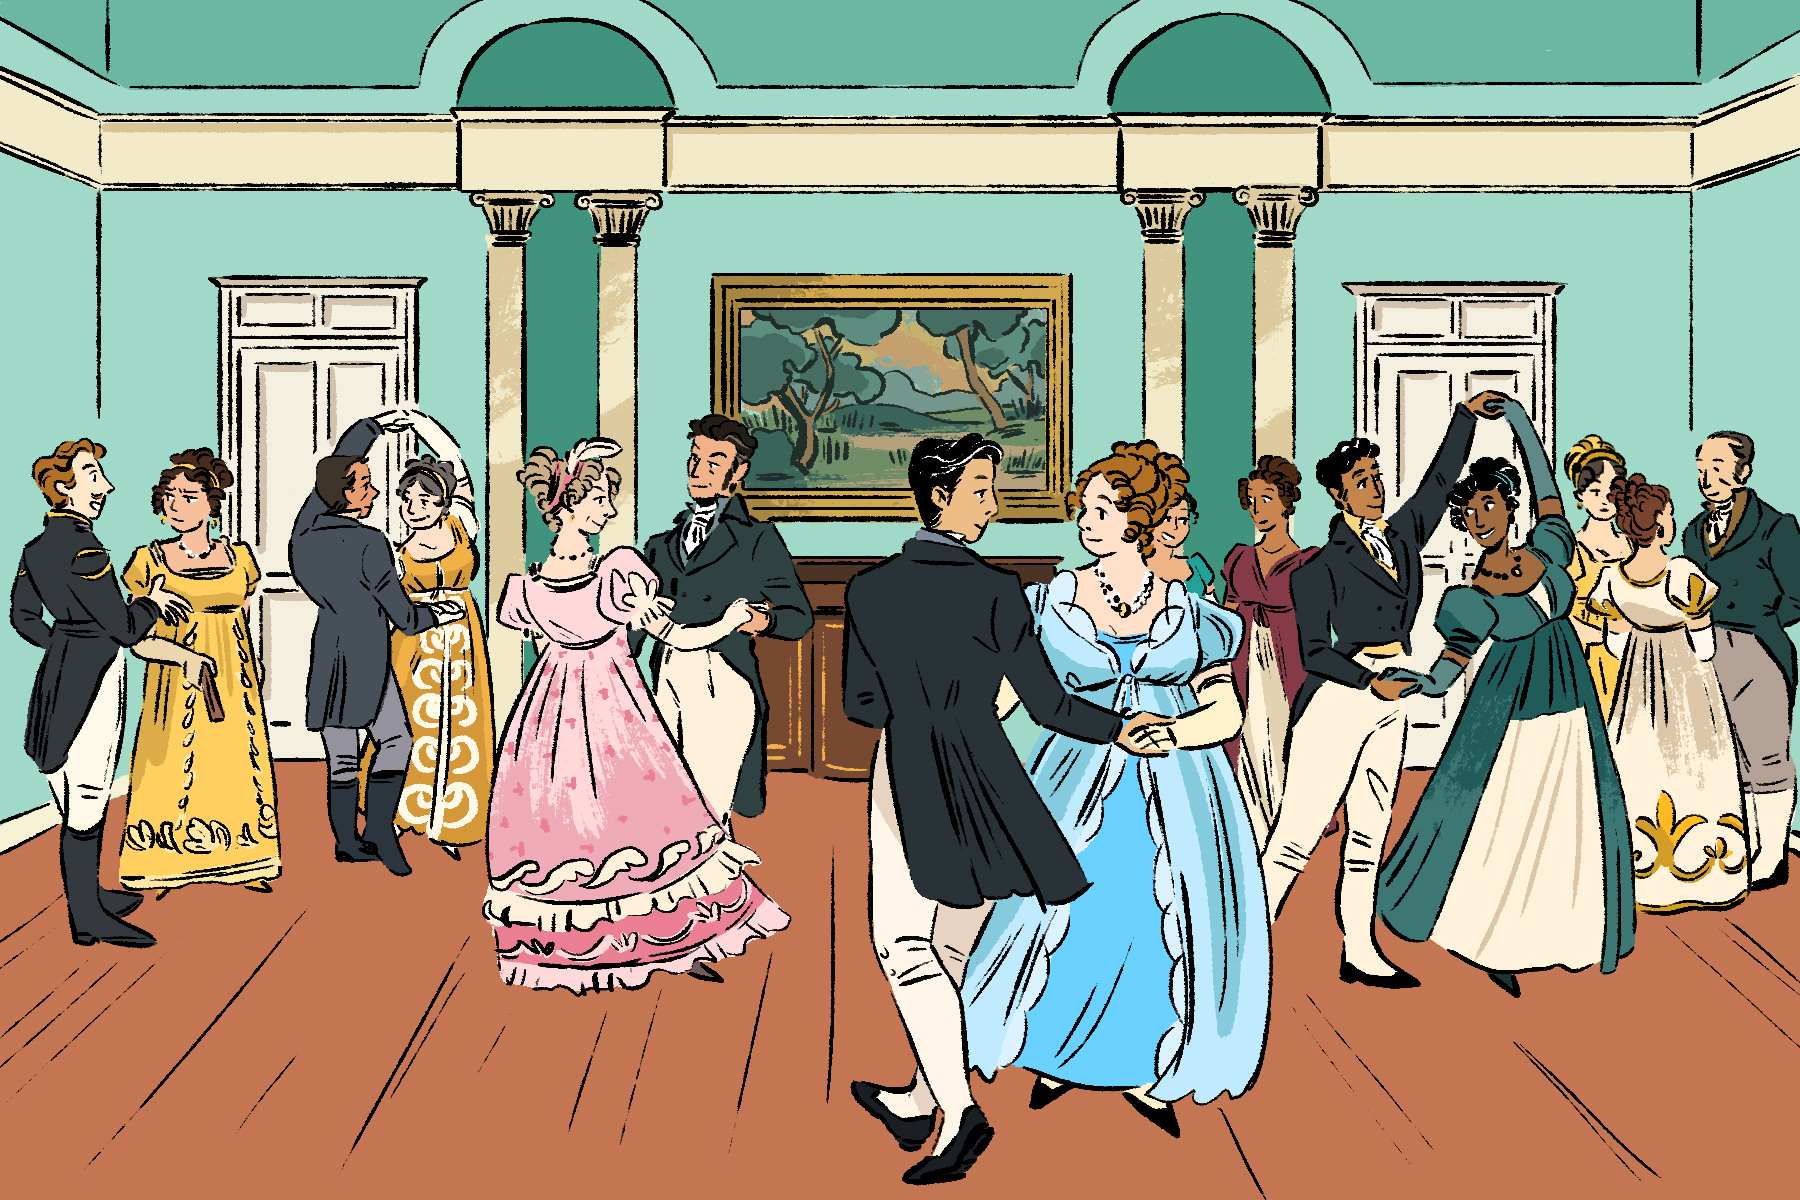 illustration of people dancing at an 18th century ball